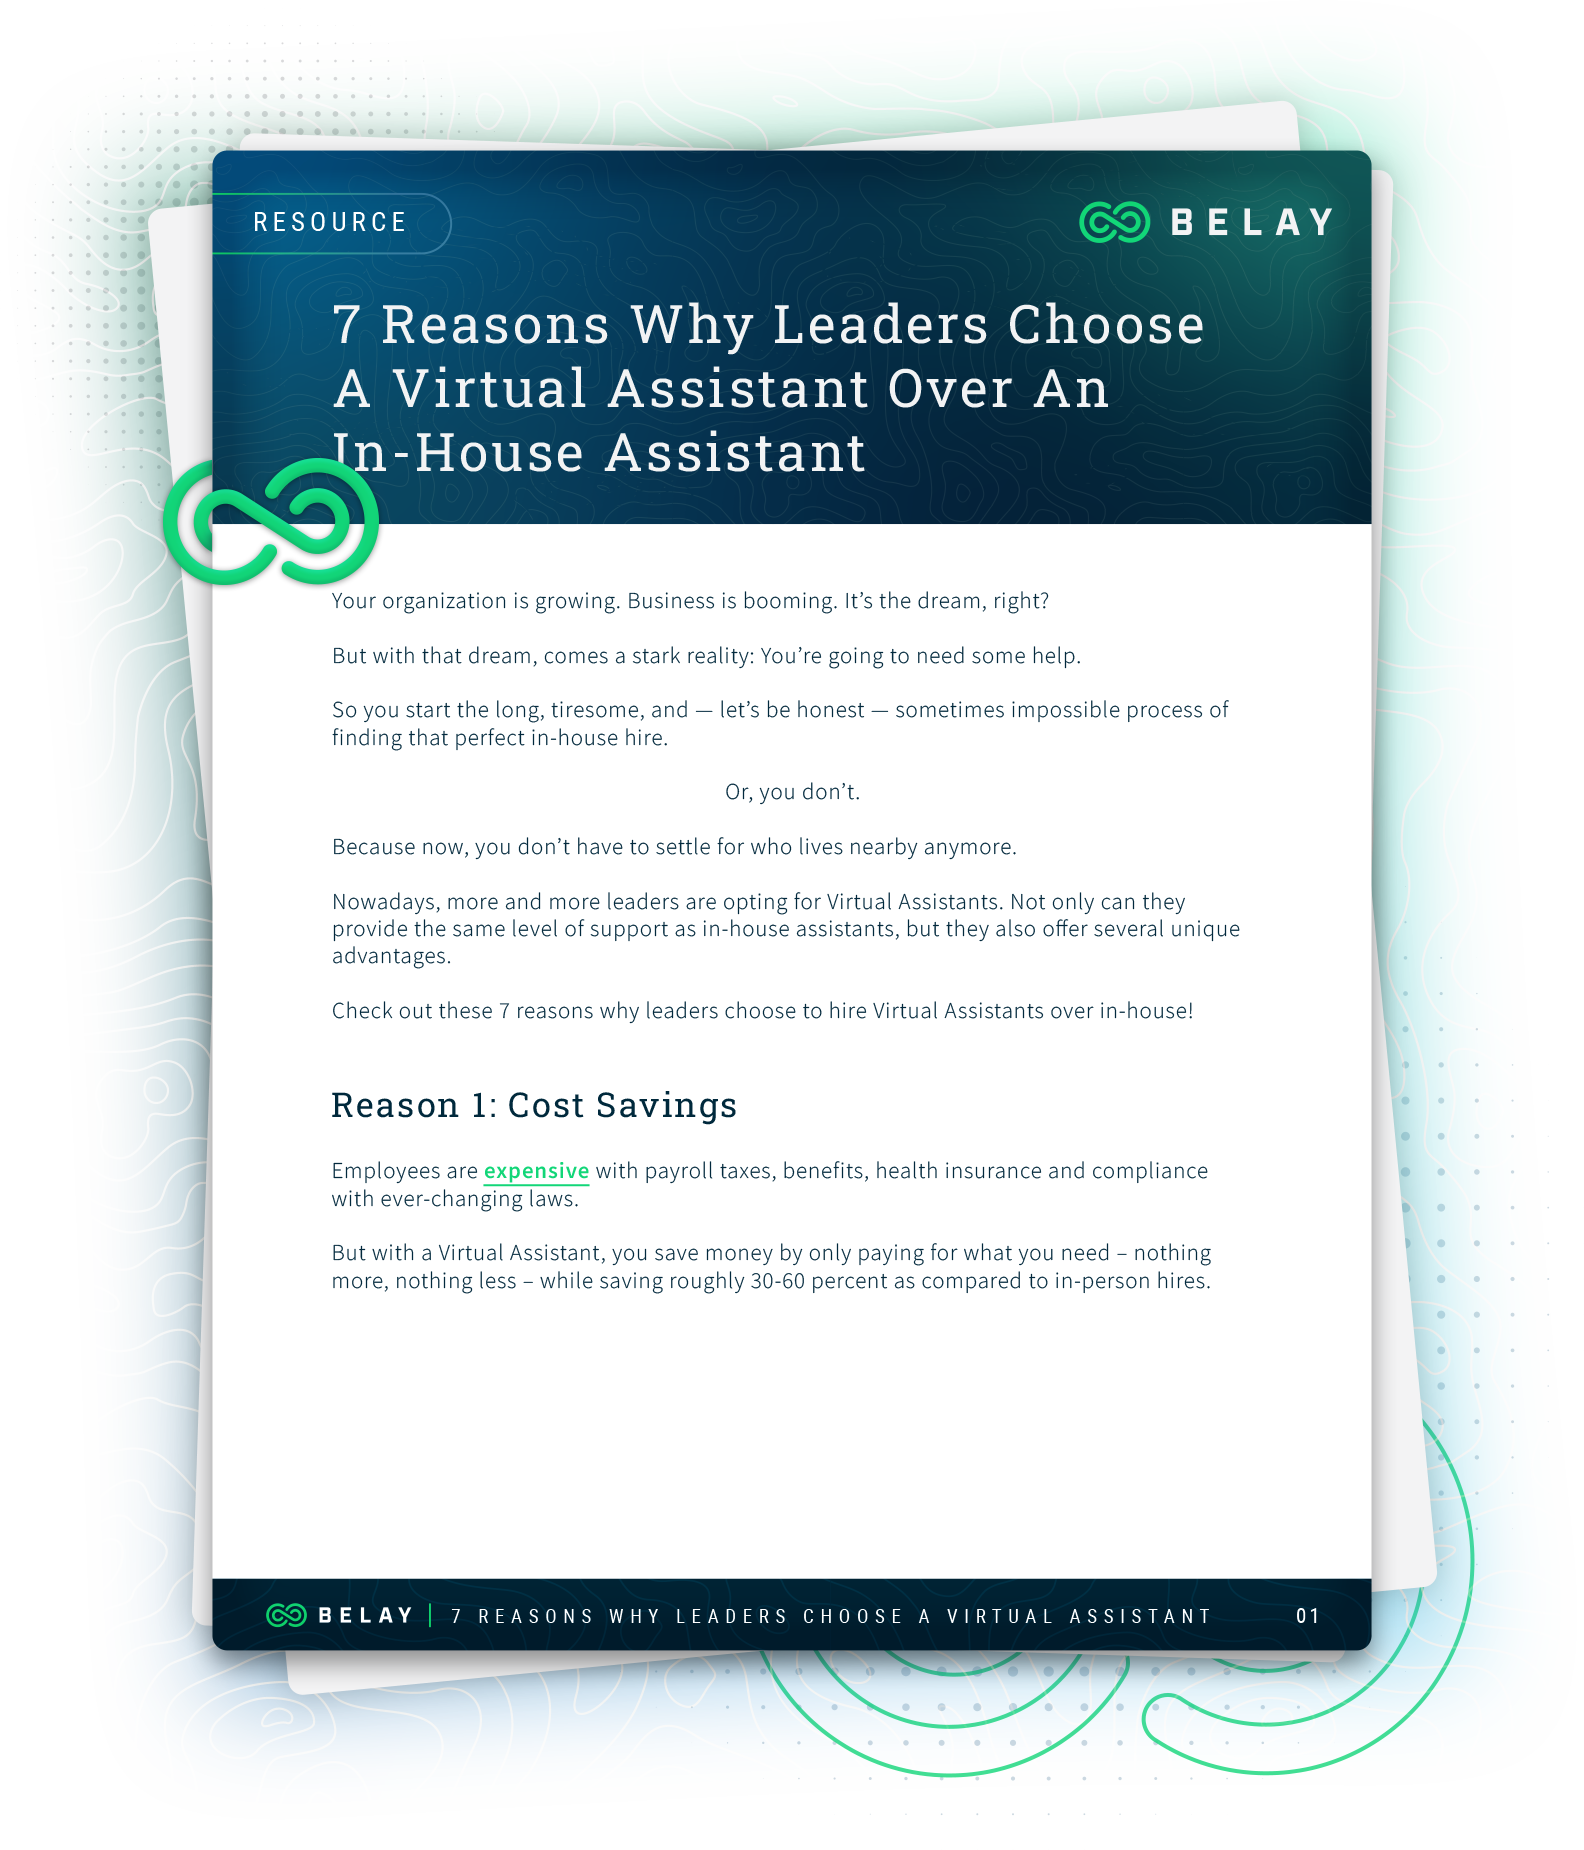 7 Reasons Why Leaders Choose A Virtual Assistant Over An In-House Assistant